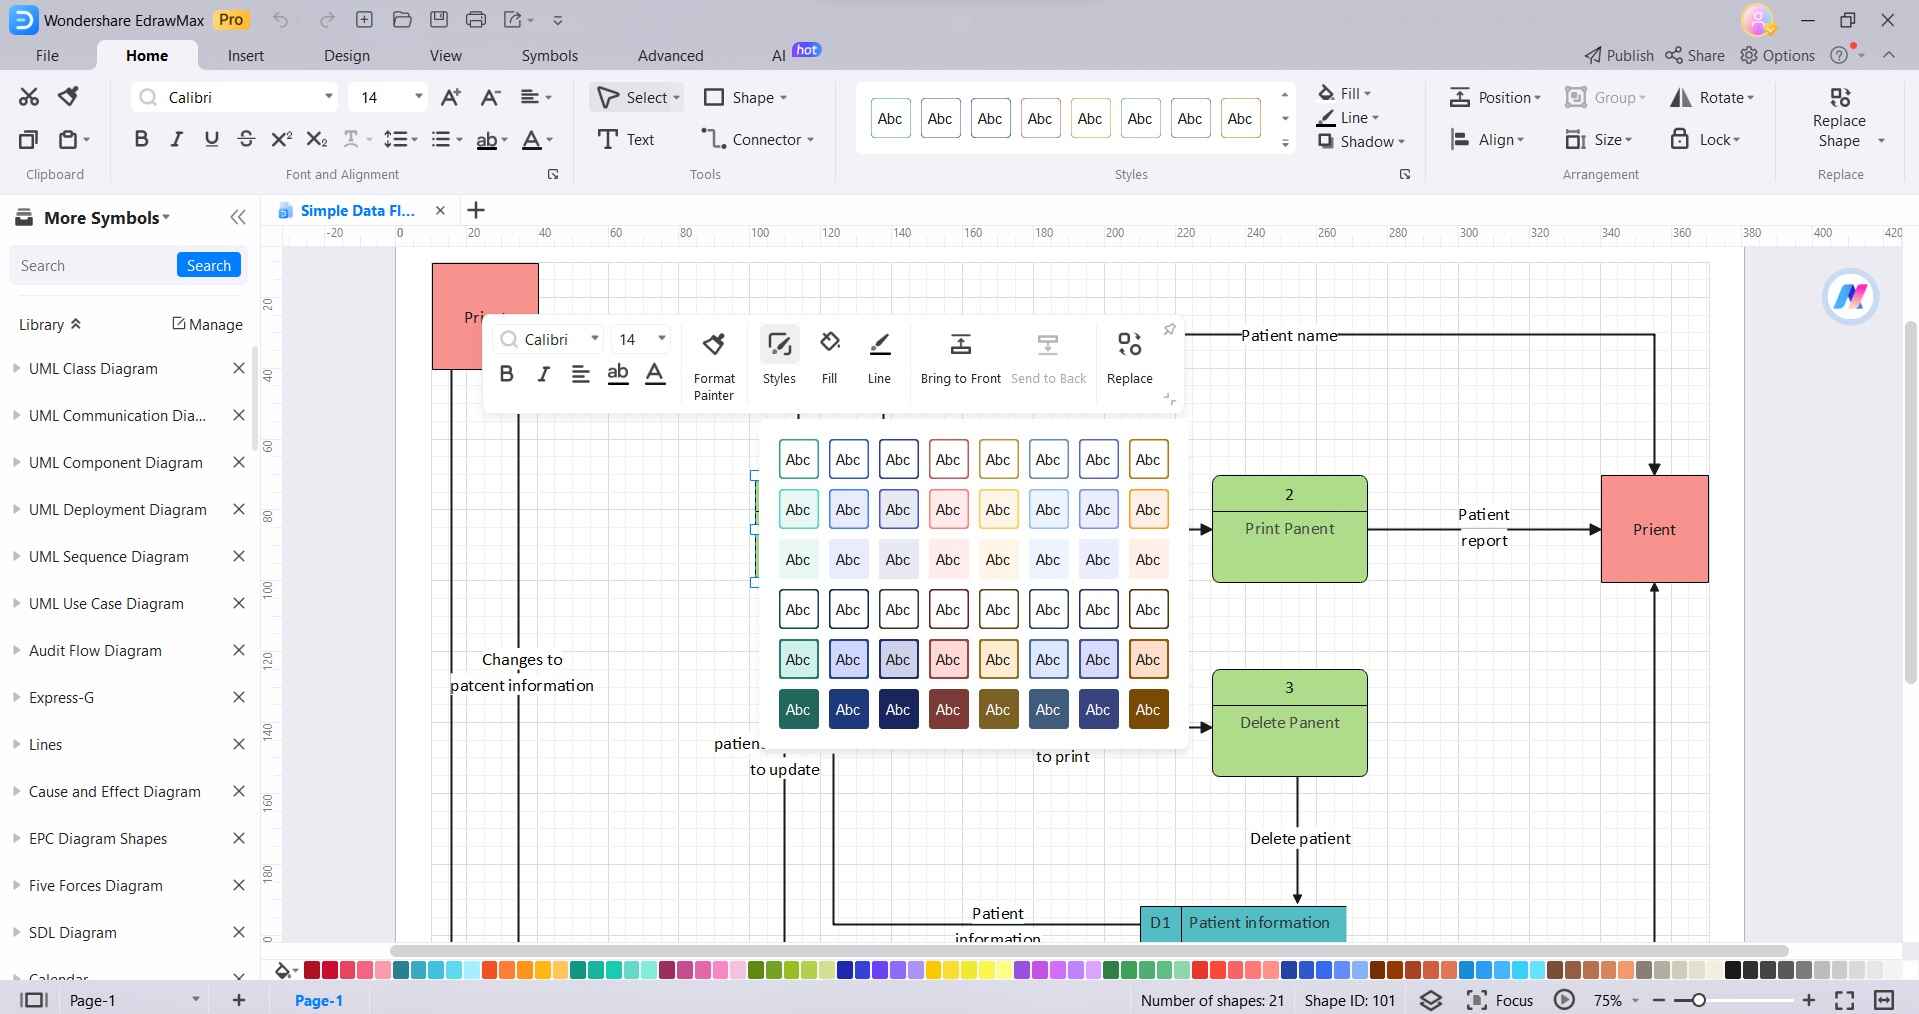 how-to-use-visio-online-editor-free-for-creative-flow-05.jpg